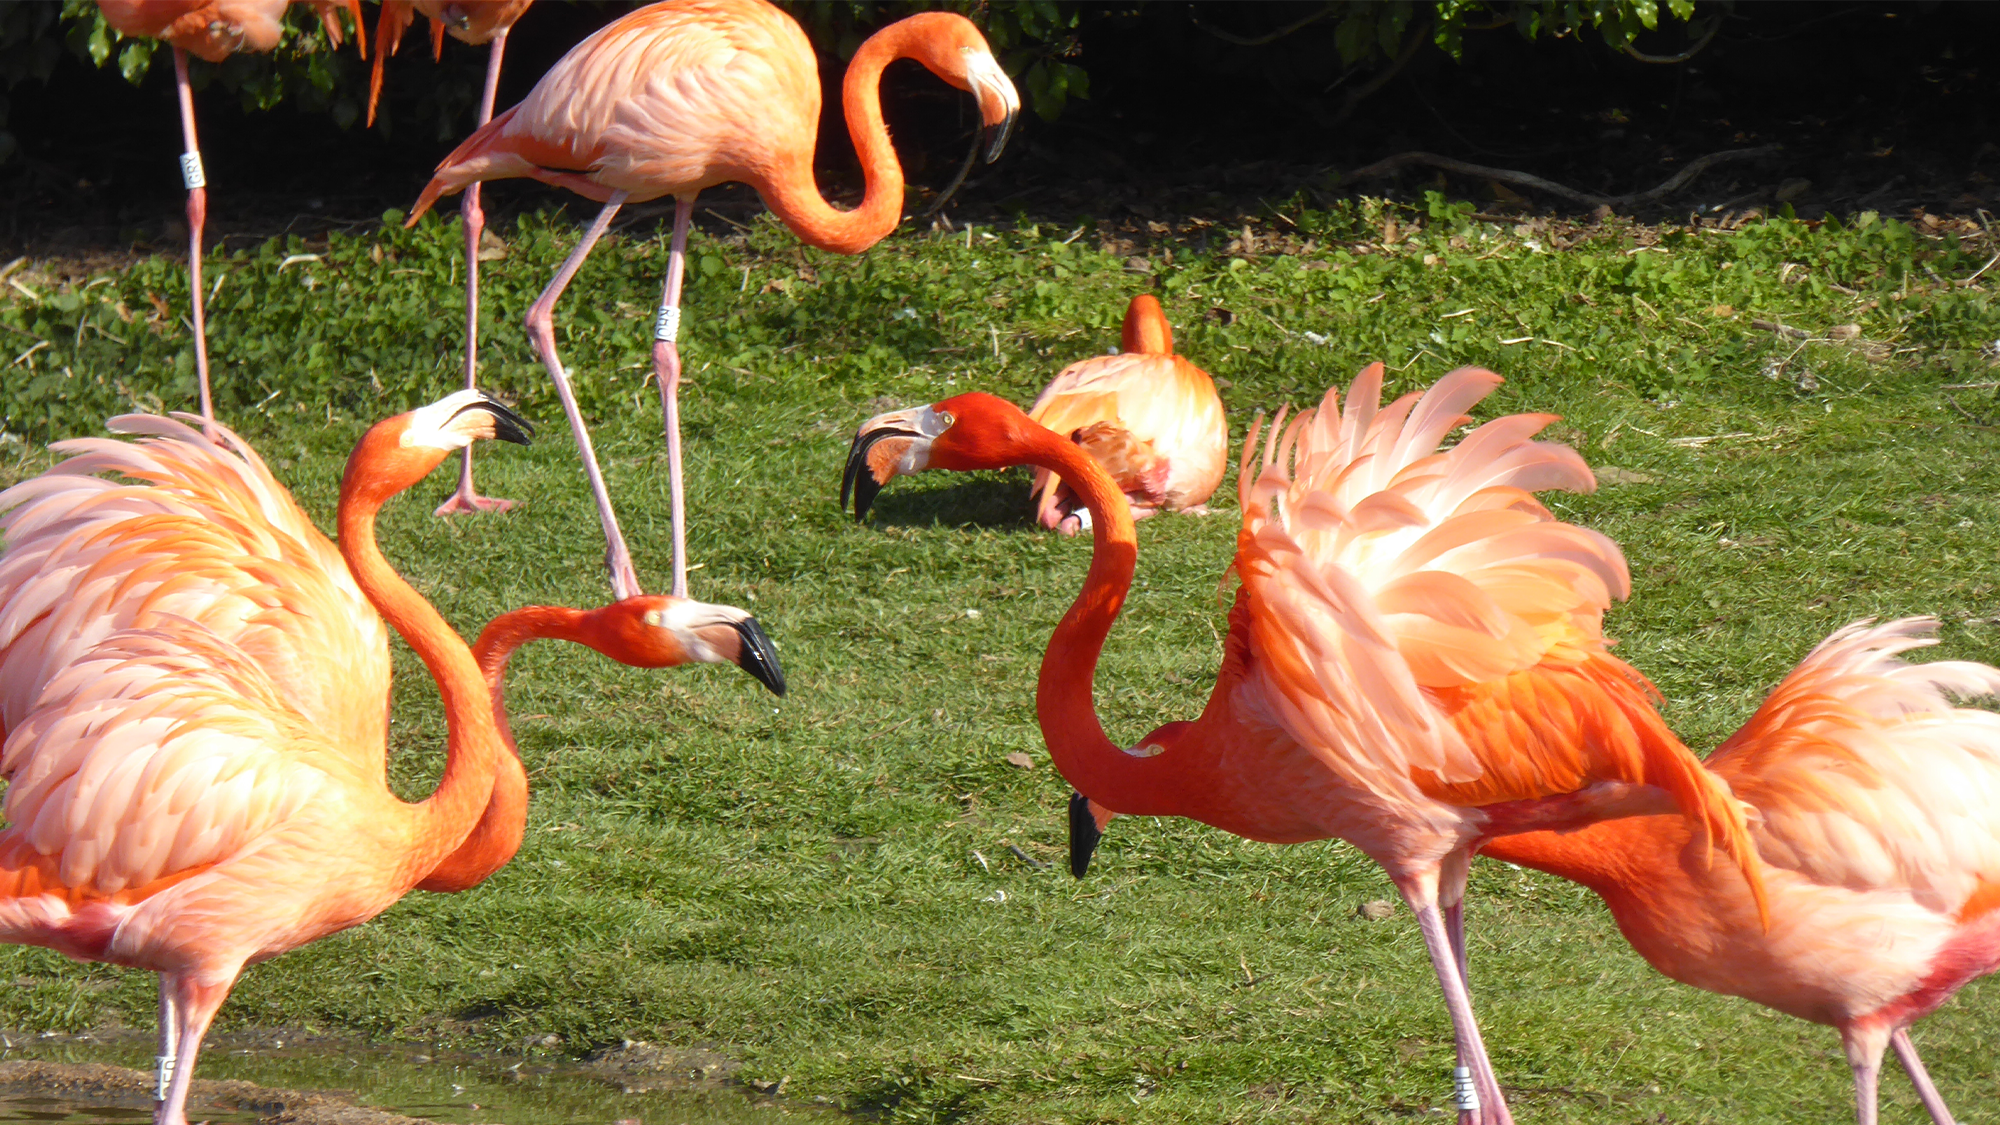 The partner of one Caribbean flamingo helps it out in an argument with another pair.